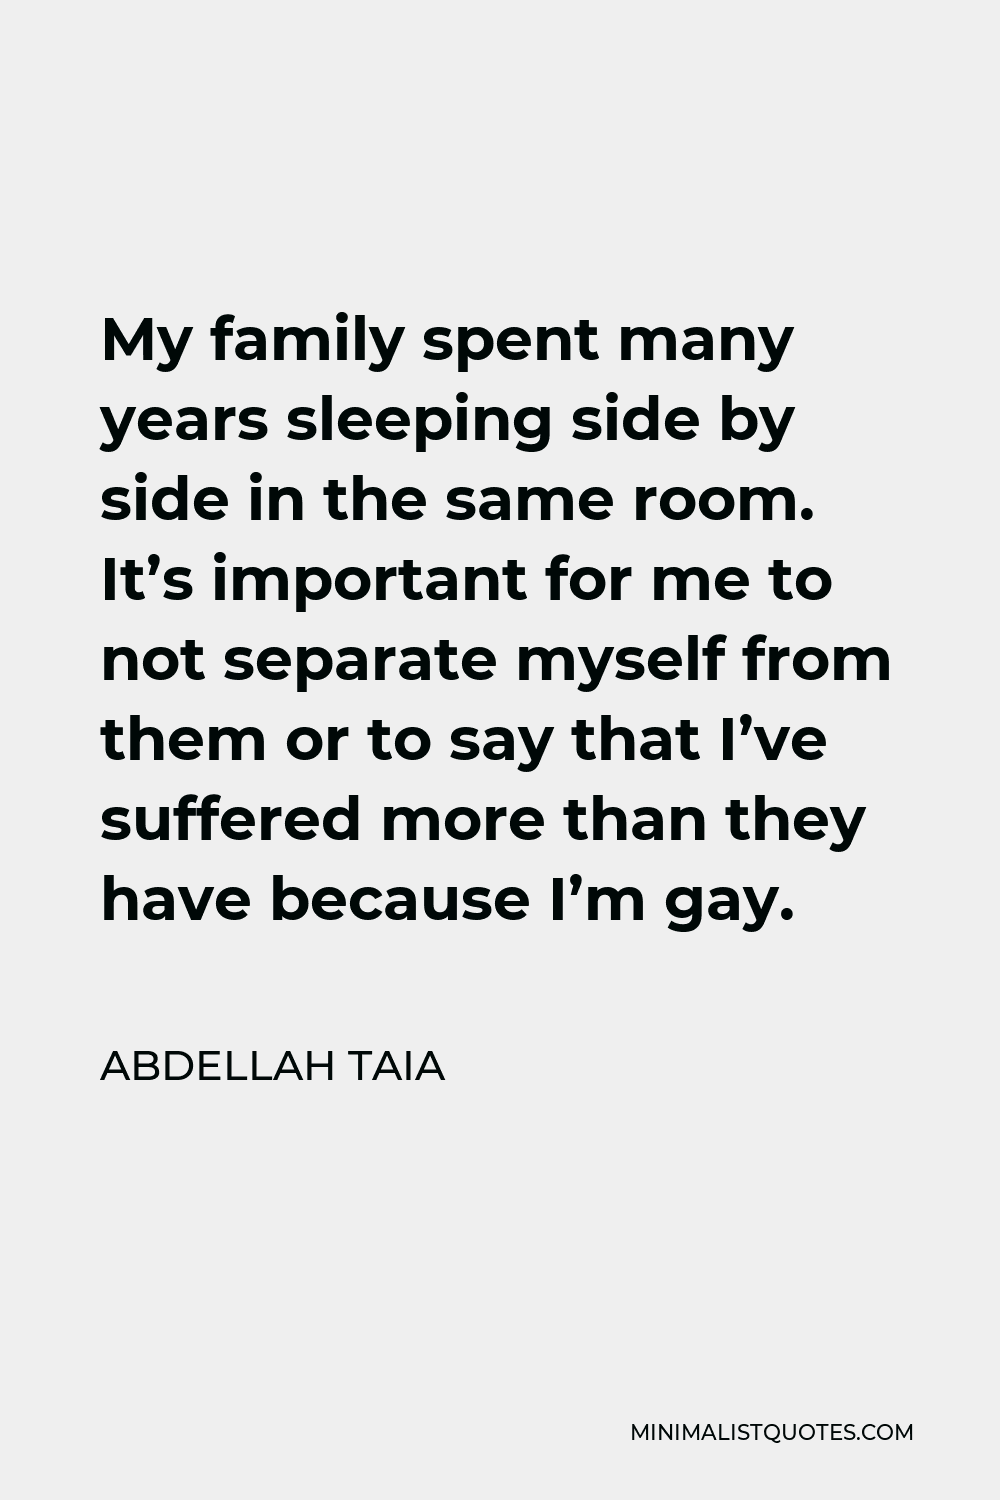 Abdellah Taia Quote - My family spent many years sleeping side by side in the same room. It’s important for me to not separate myself from them or to say that I’ve suffered more than they have because I’m gay.